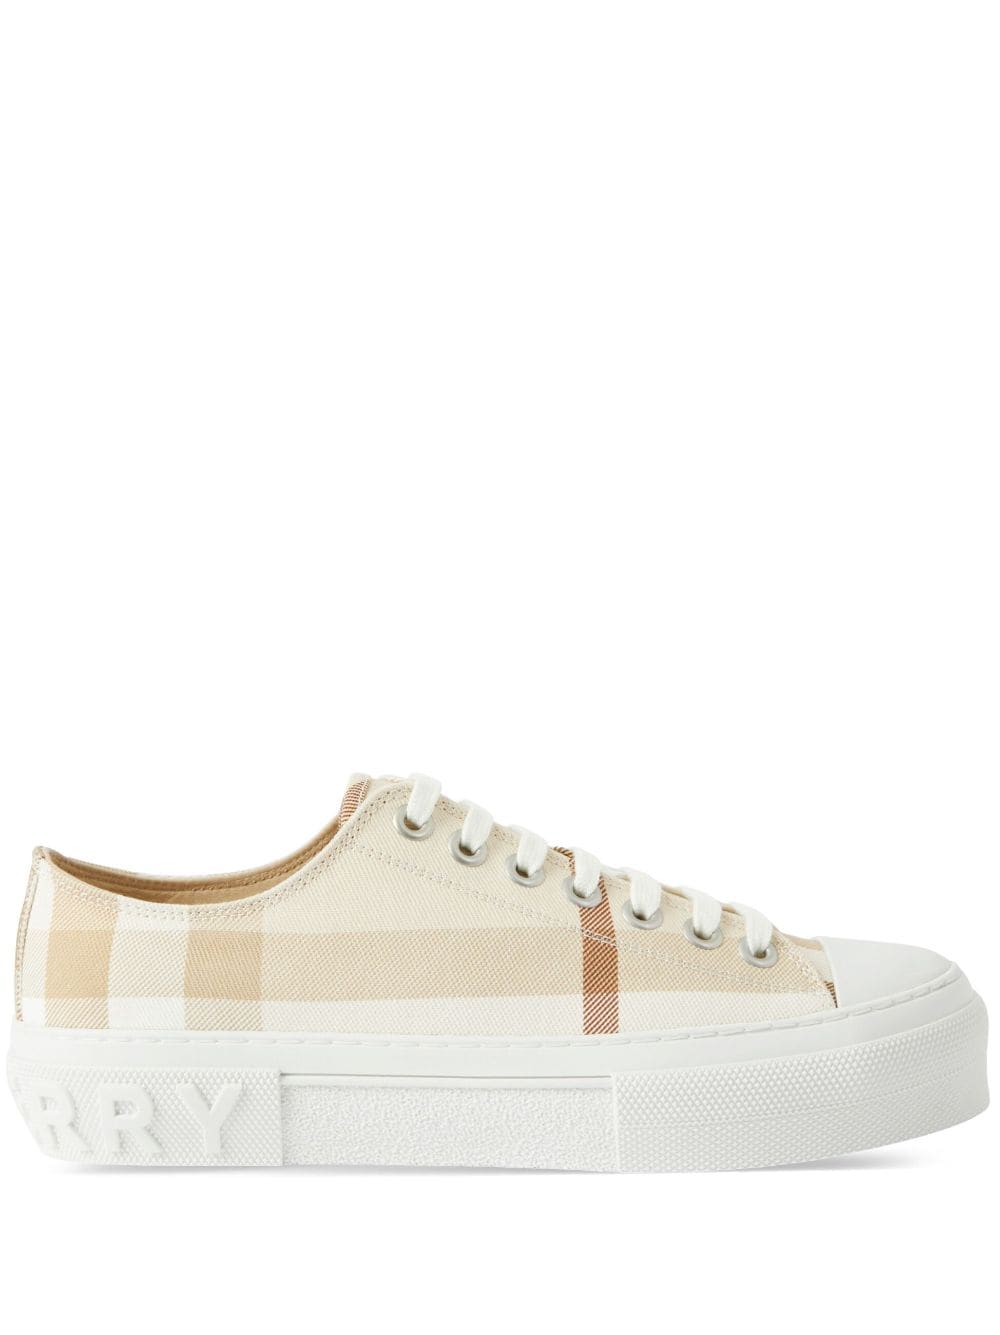 BURBERRY CHECK-PRINT LOW-TOP SNEAKERS